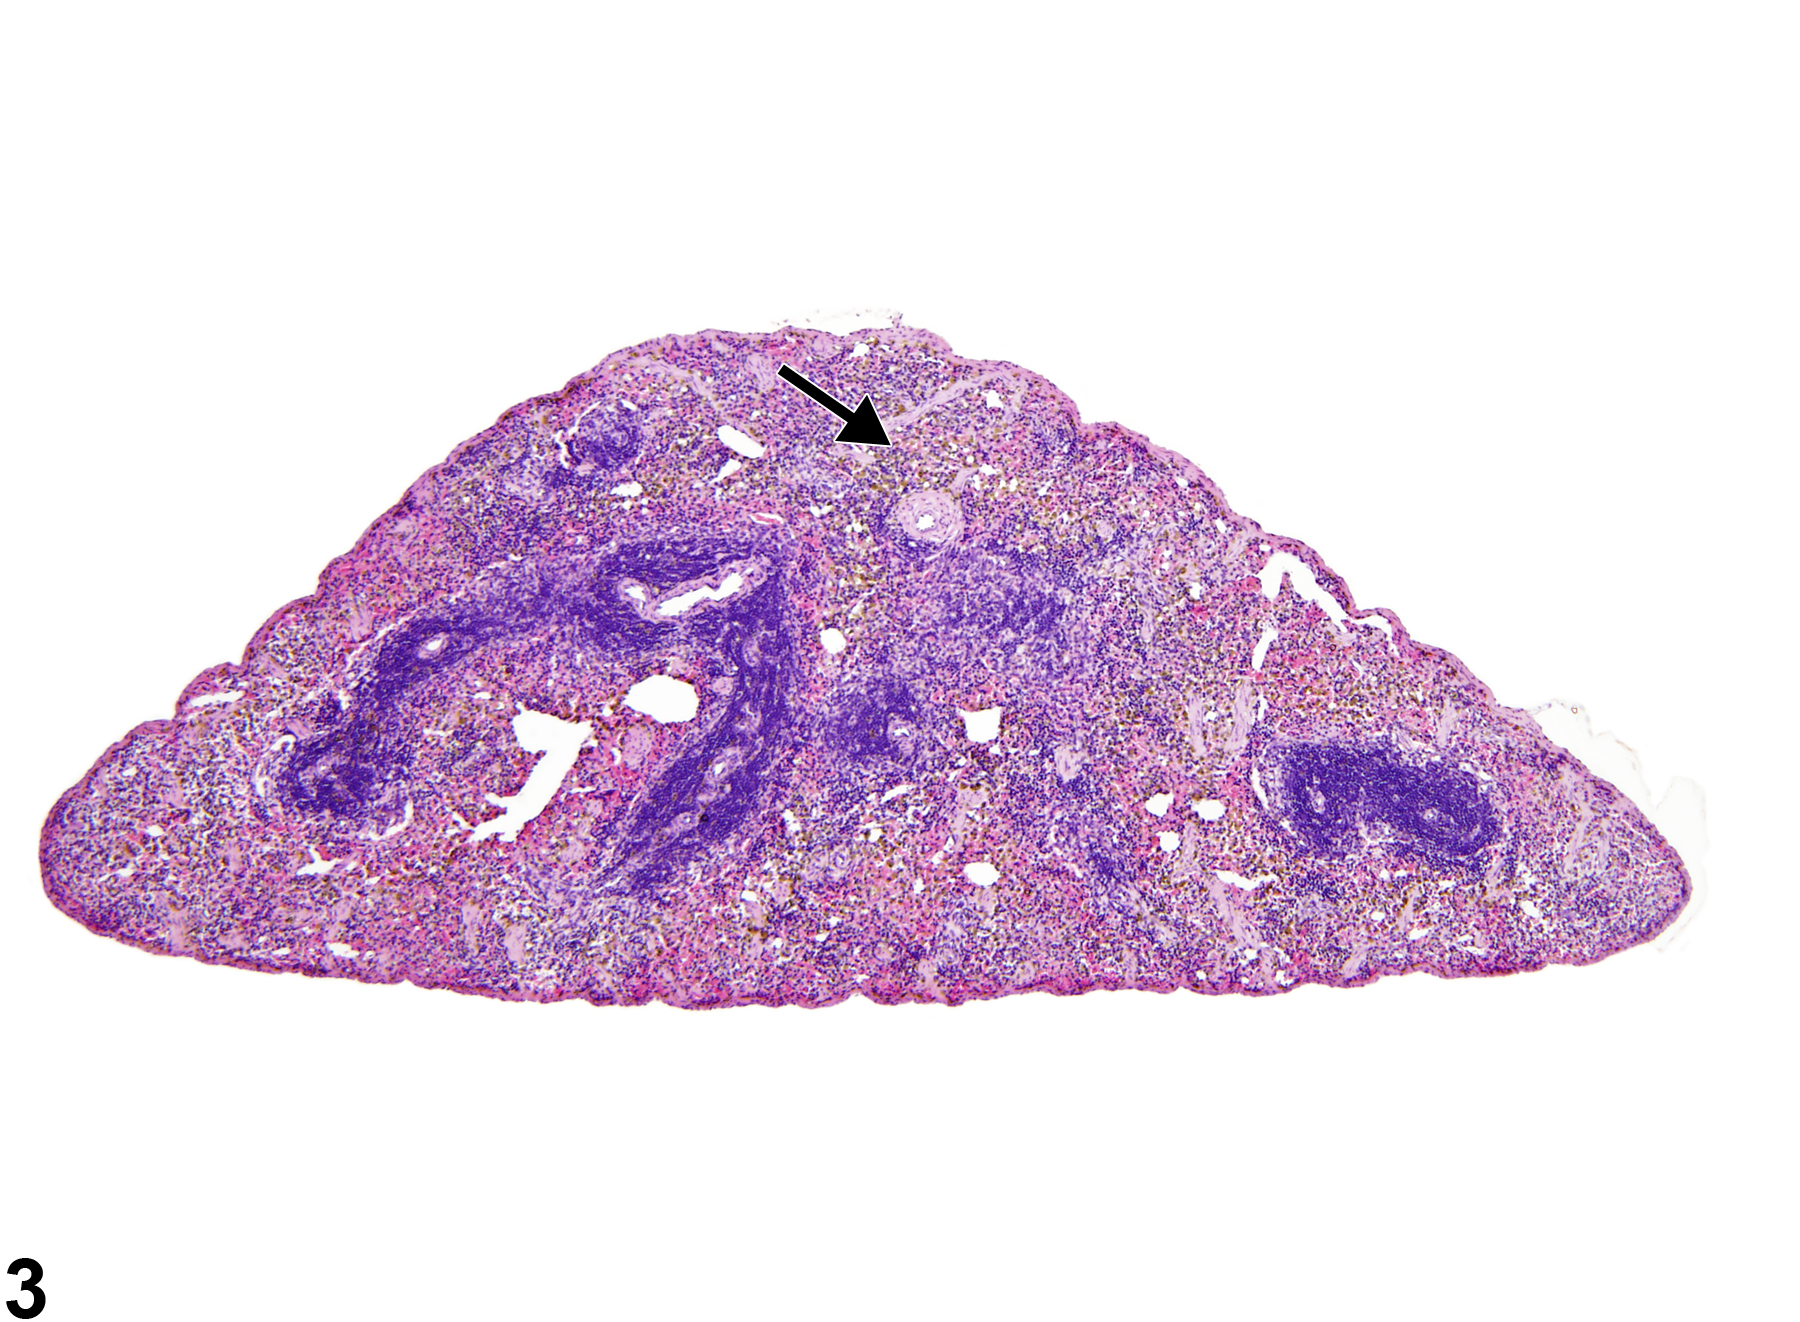 Image of atrophy in the spleen from a female B6C3F1/N mouse in a subchronic study